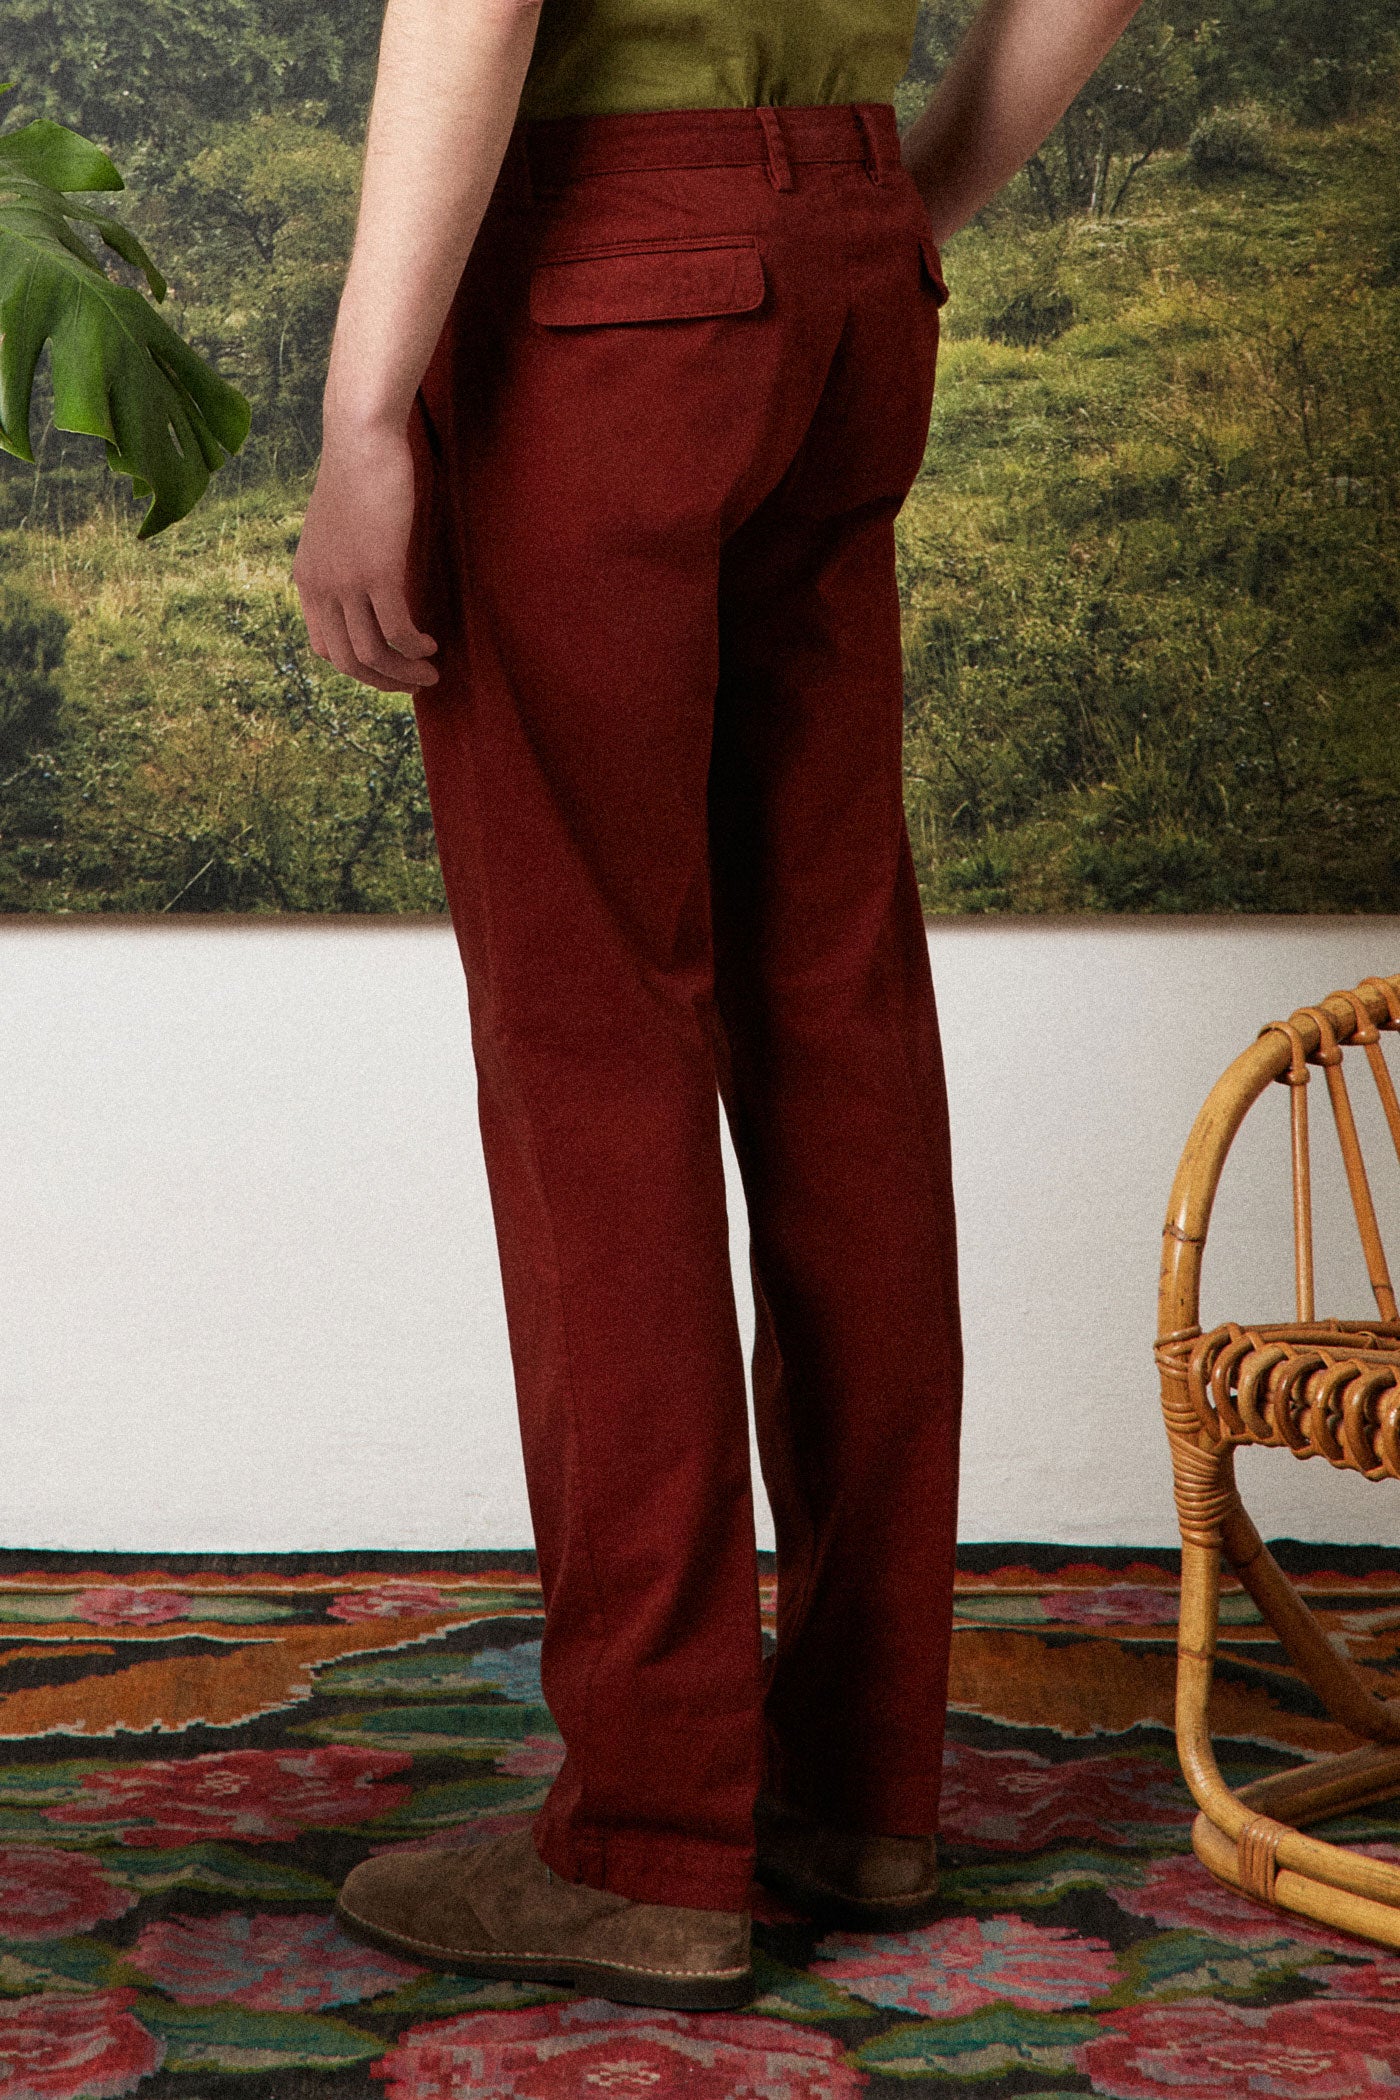 O'Connell's Vintage Embroidered Corduroy Trousers - Fishing Flies on Rust -  Men's Clothing, Traditional Natural shouldered clothing, preppy apparel